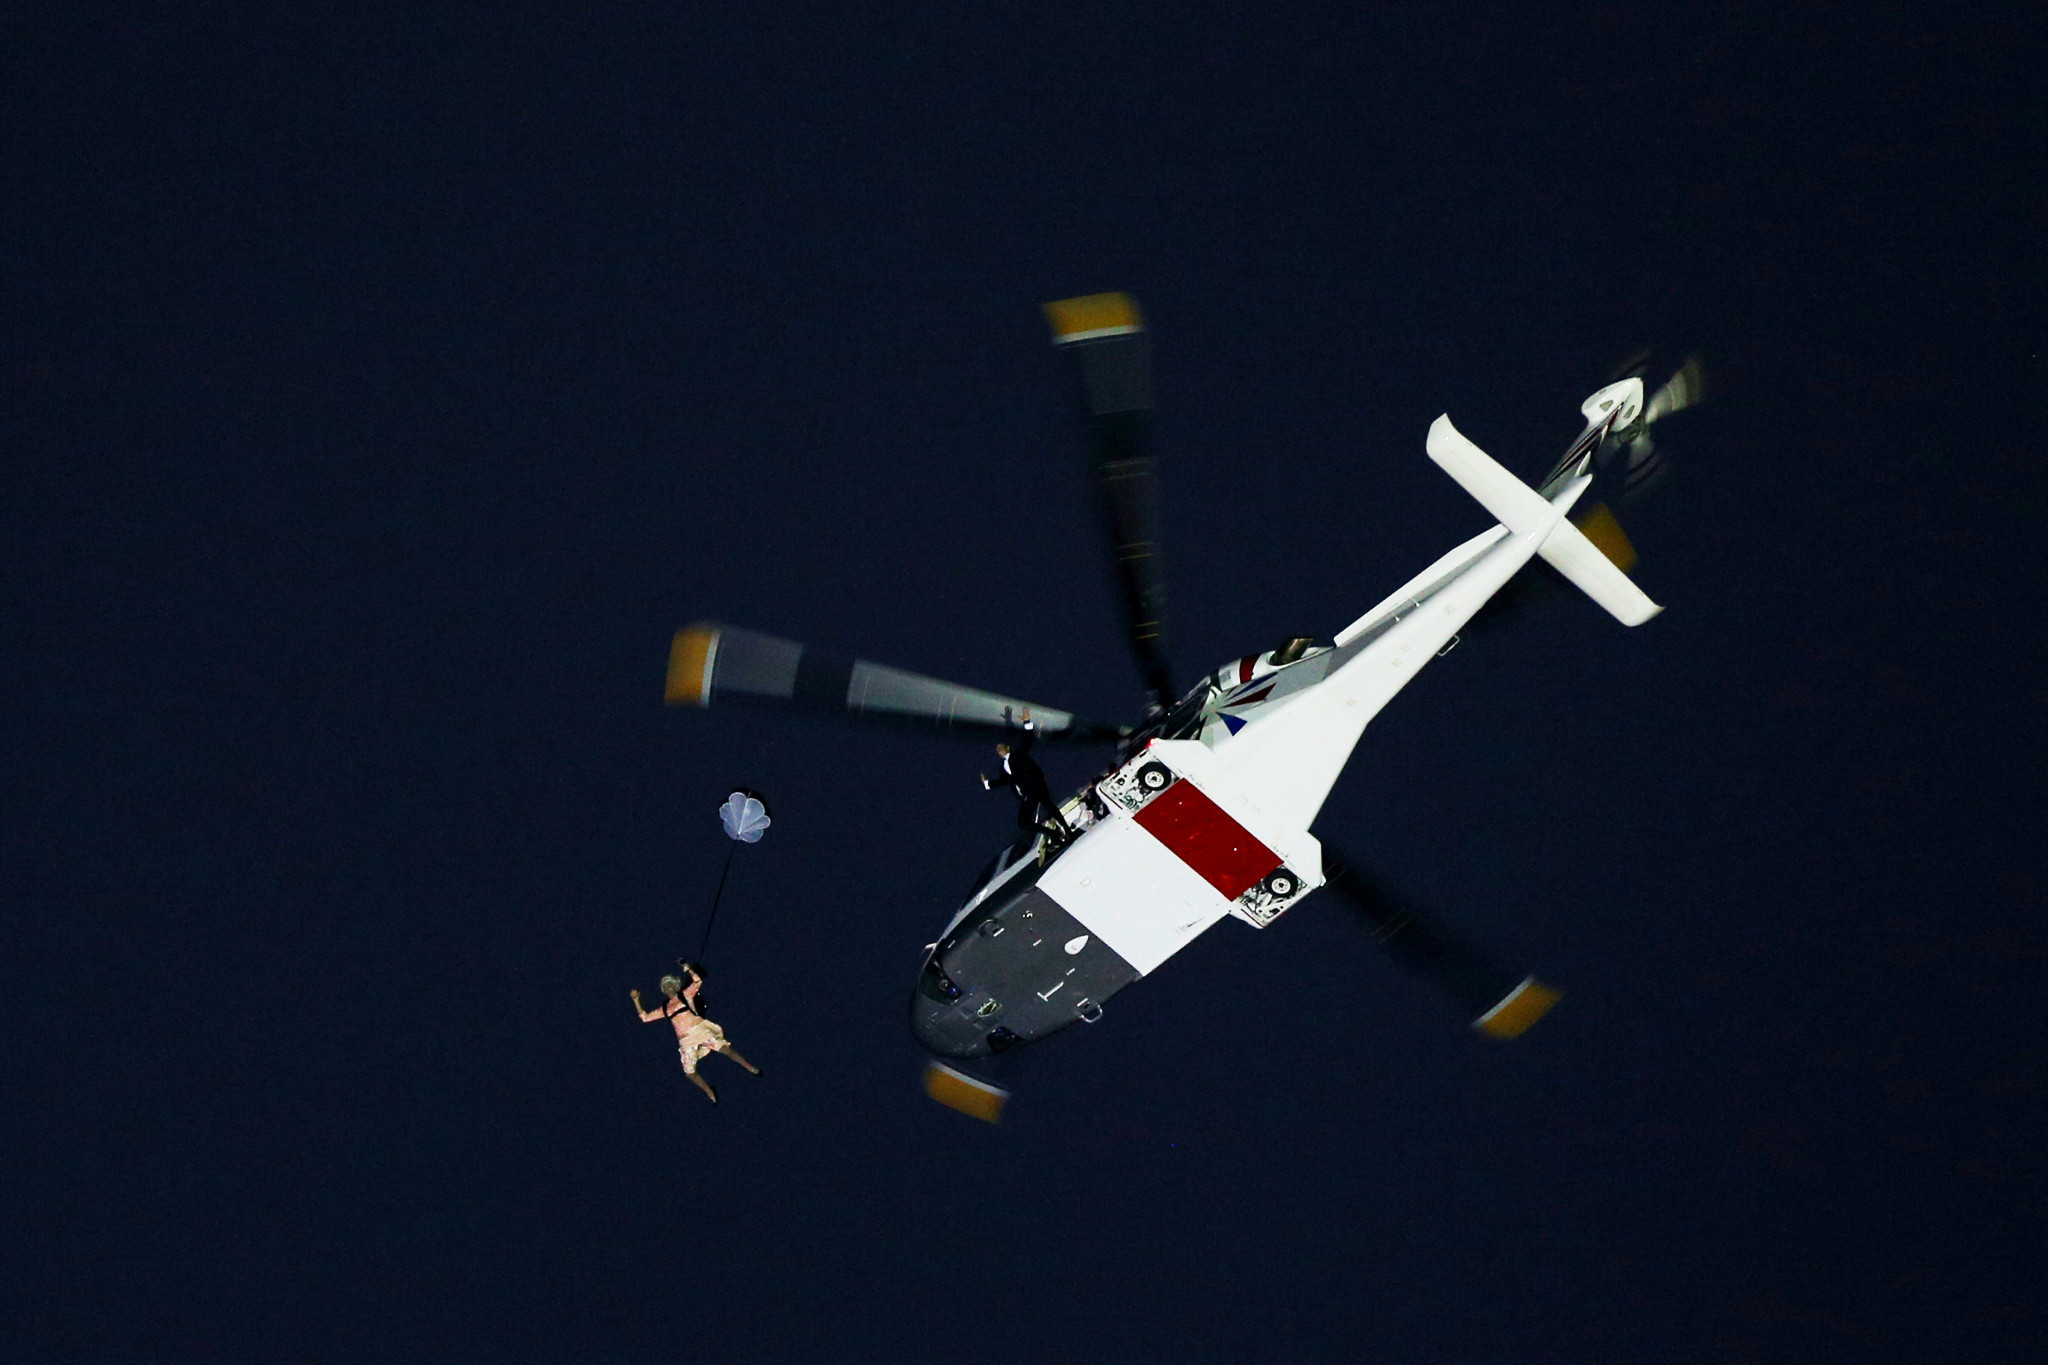 A stunt featuring "The Queen" proved a hit during the London 2012 Opening Ceremony ©Getty Images